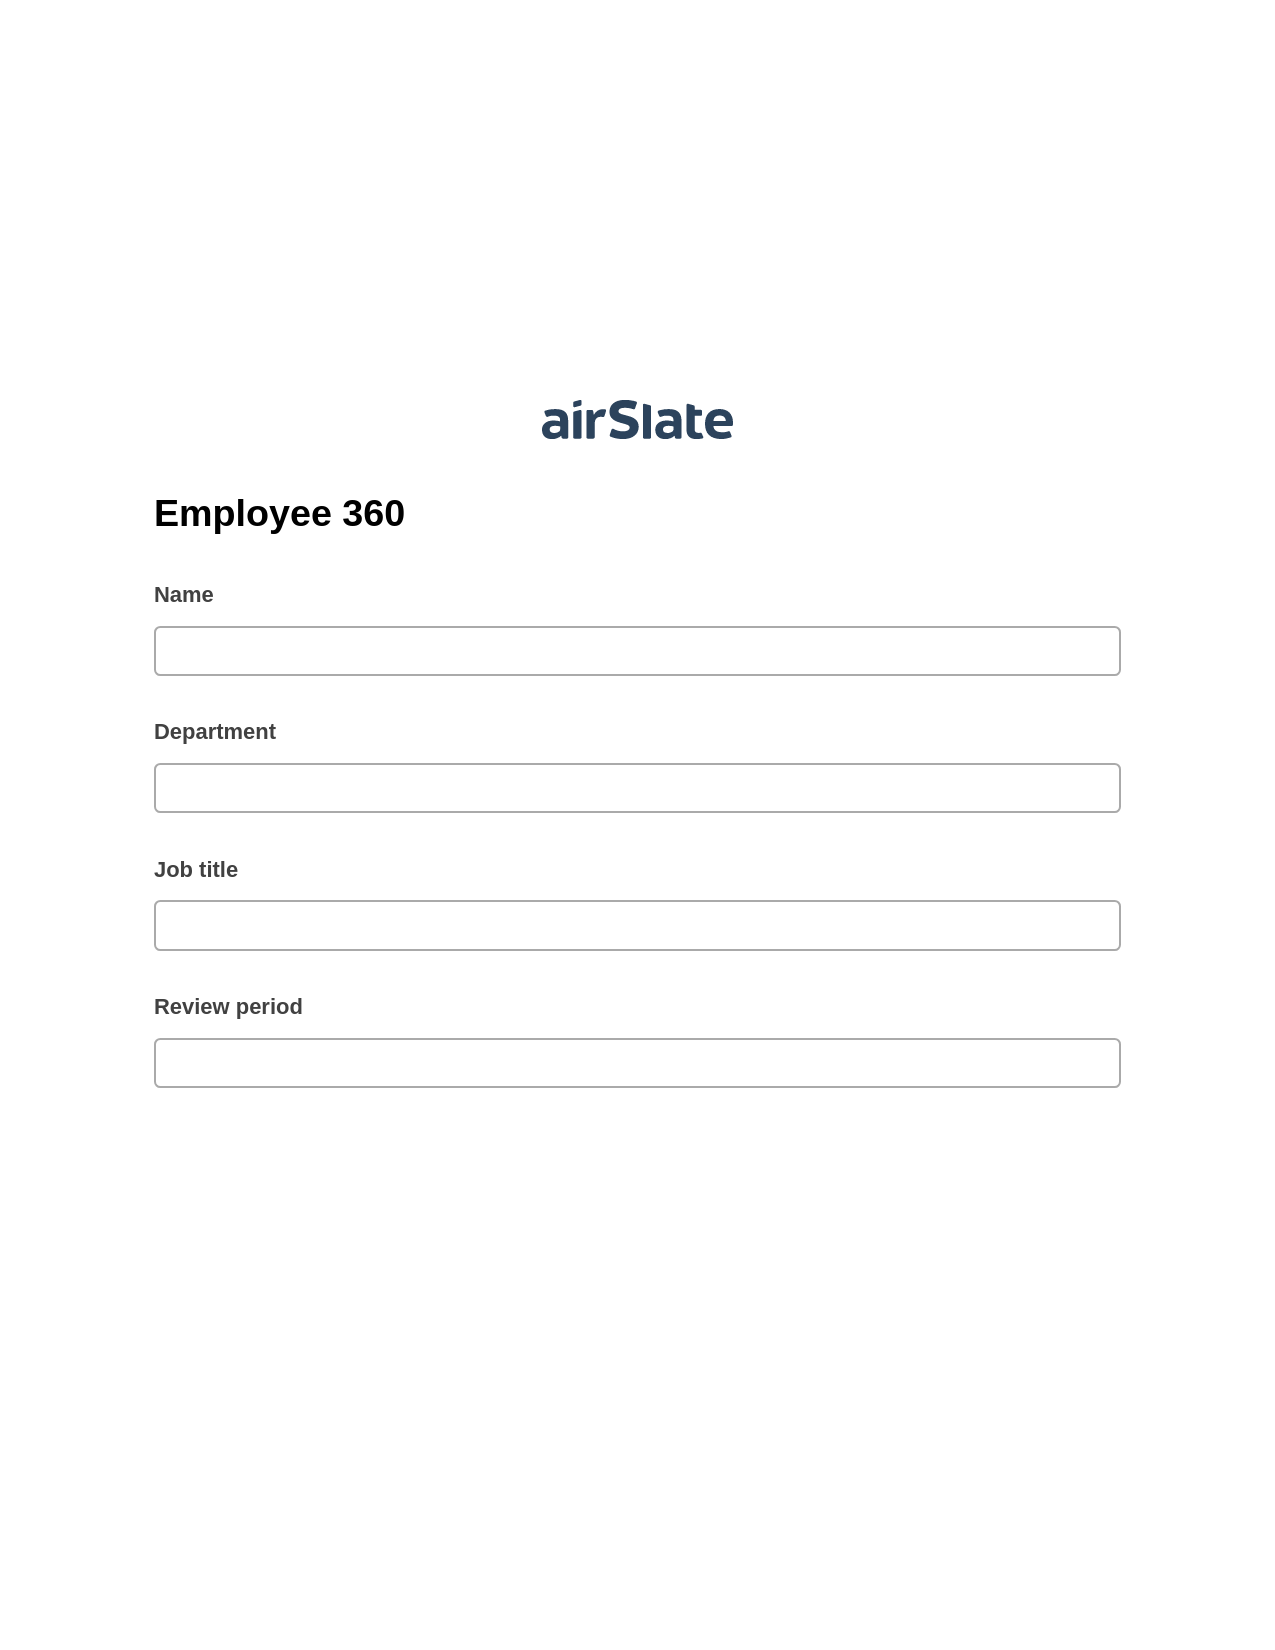 Employee 360 Pre-fill from Excel Spreadsheet Bot, Export to MS Dynamics 365 Bot, Archive to Dropbox Bot